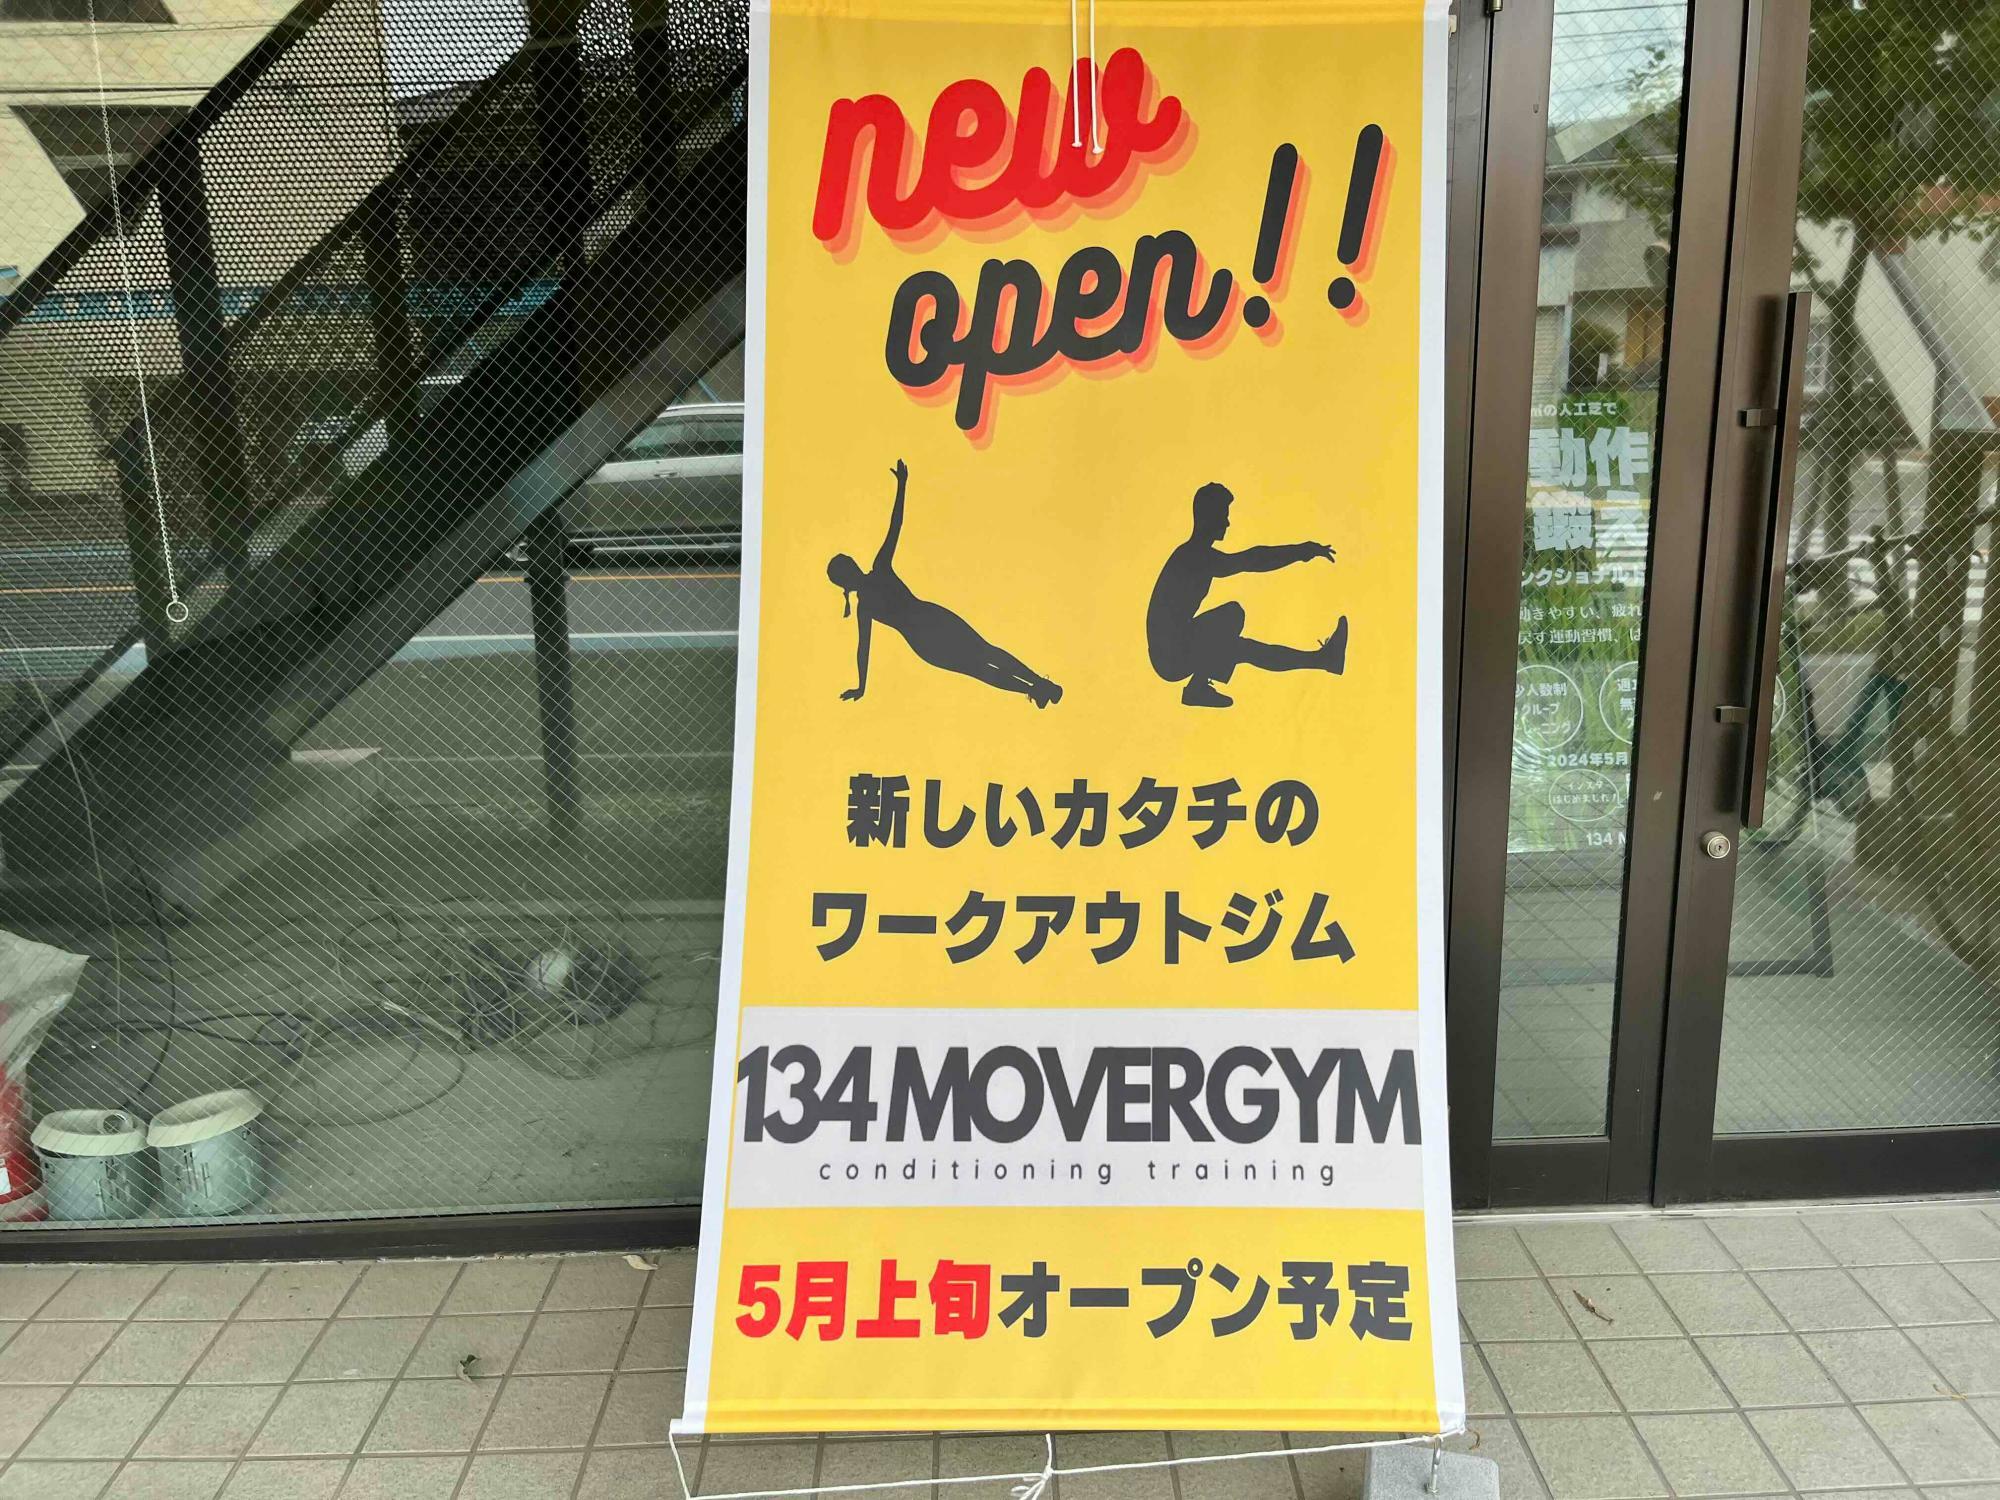 134MOVER GYM